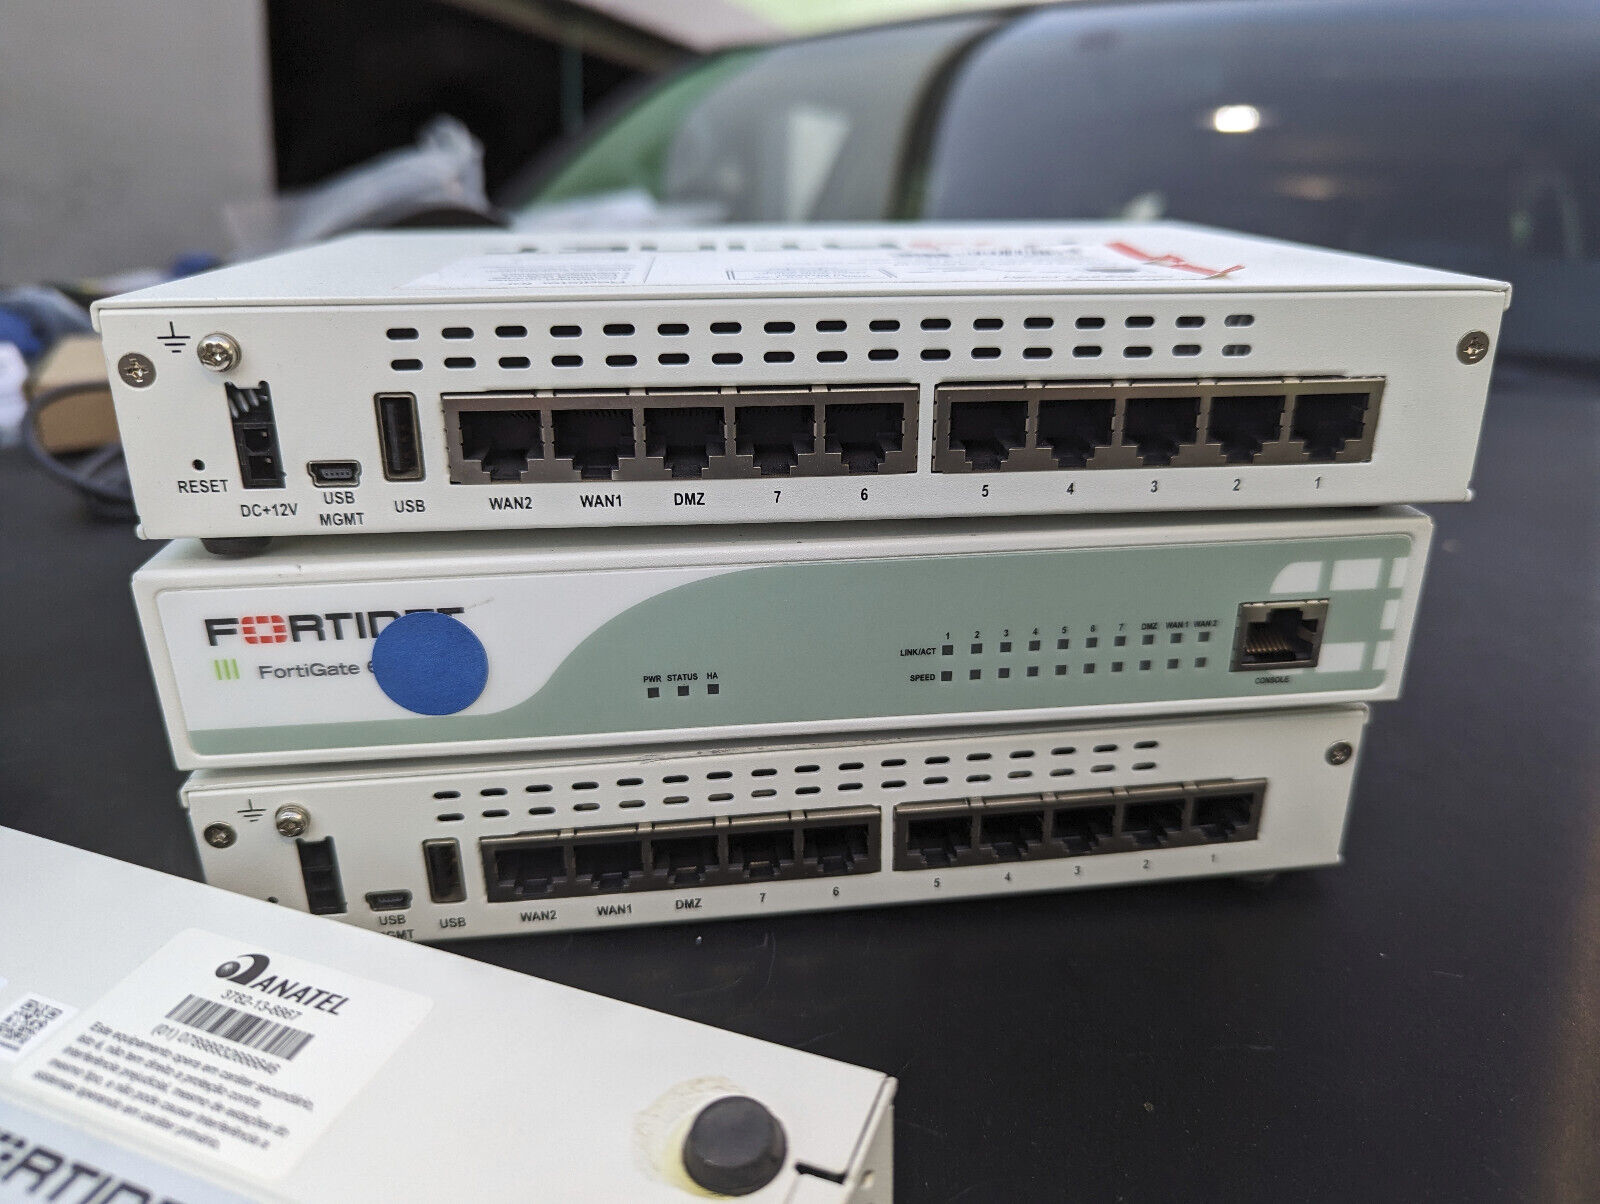 LOT OF 4 - Fortinet FortiGate 60D Firewall Router FG-60D W/O Power Supply